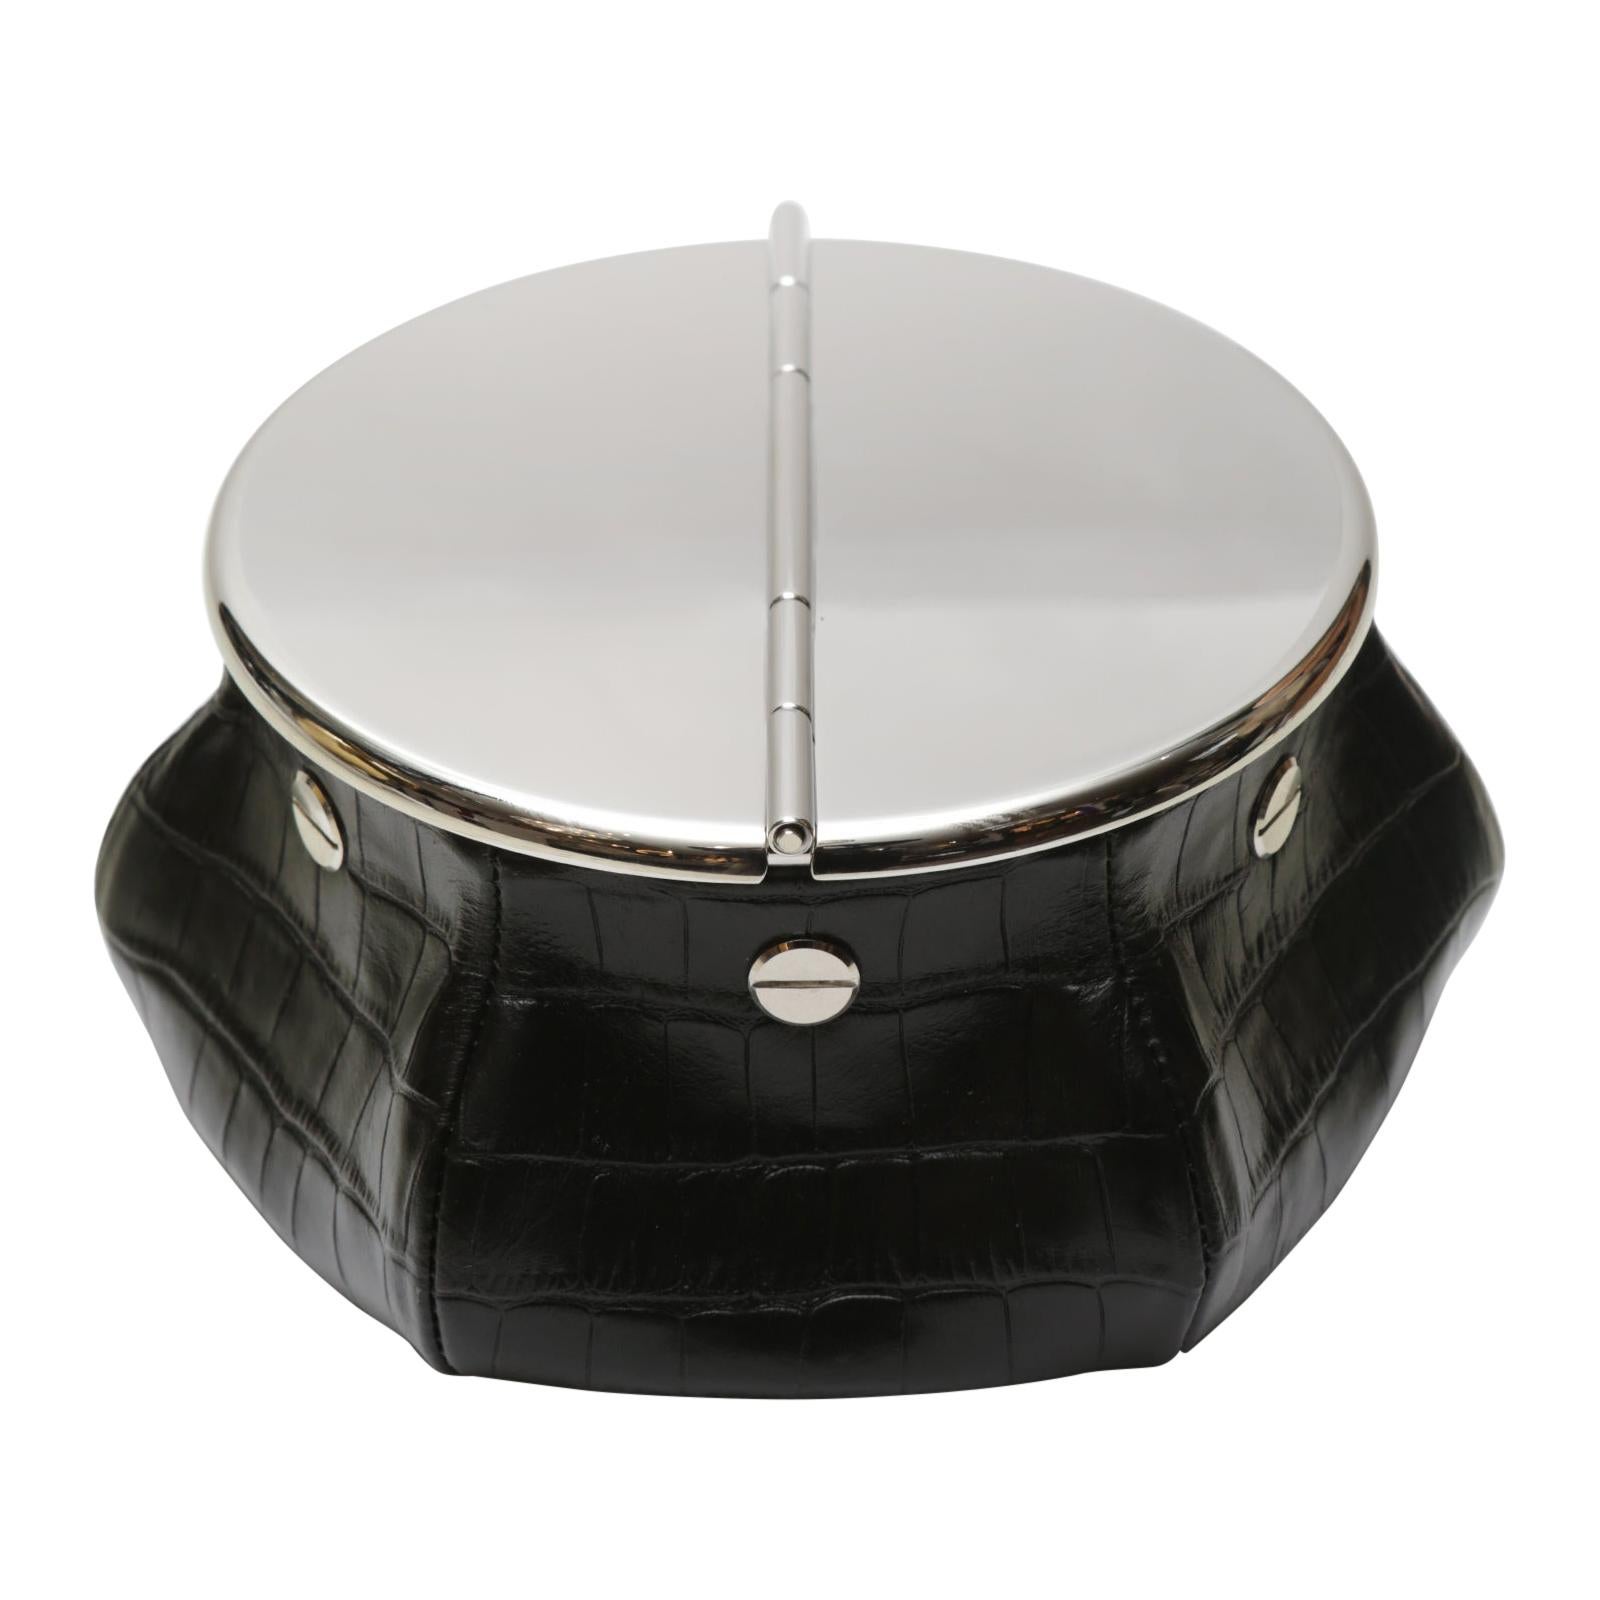 Ashtray black croco 2 cigars yachting with bag covered with
black crocodile finish printed on calfskin with black stitching. 
Bag filled with 1 kg micro metal balls that give high stability.
Ashtray top with 2 openable lids in solid brass in